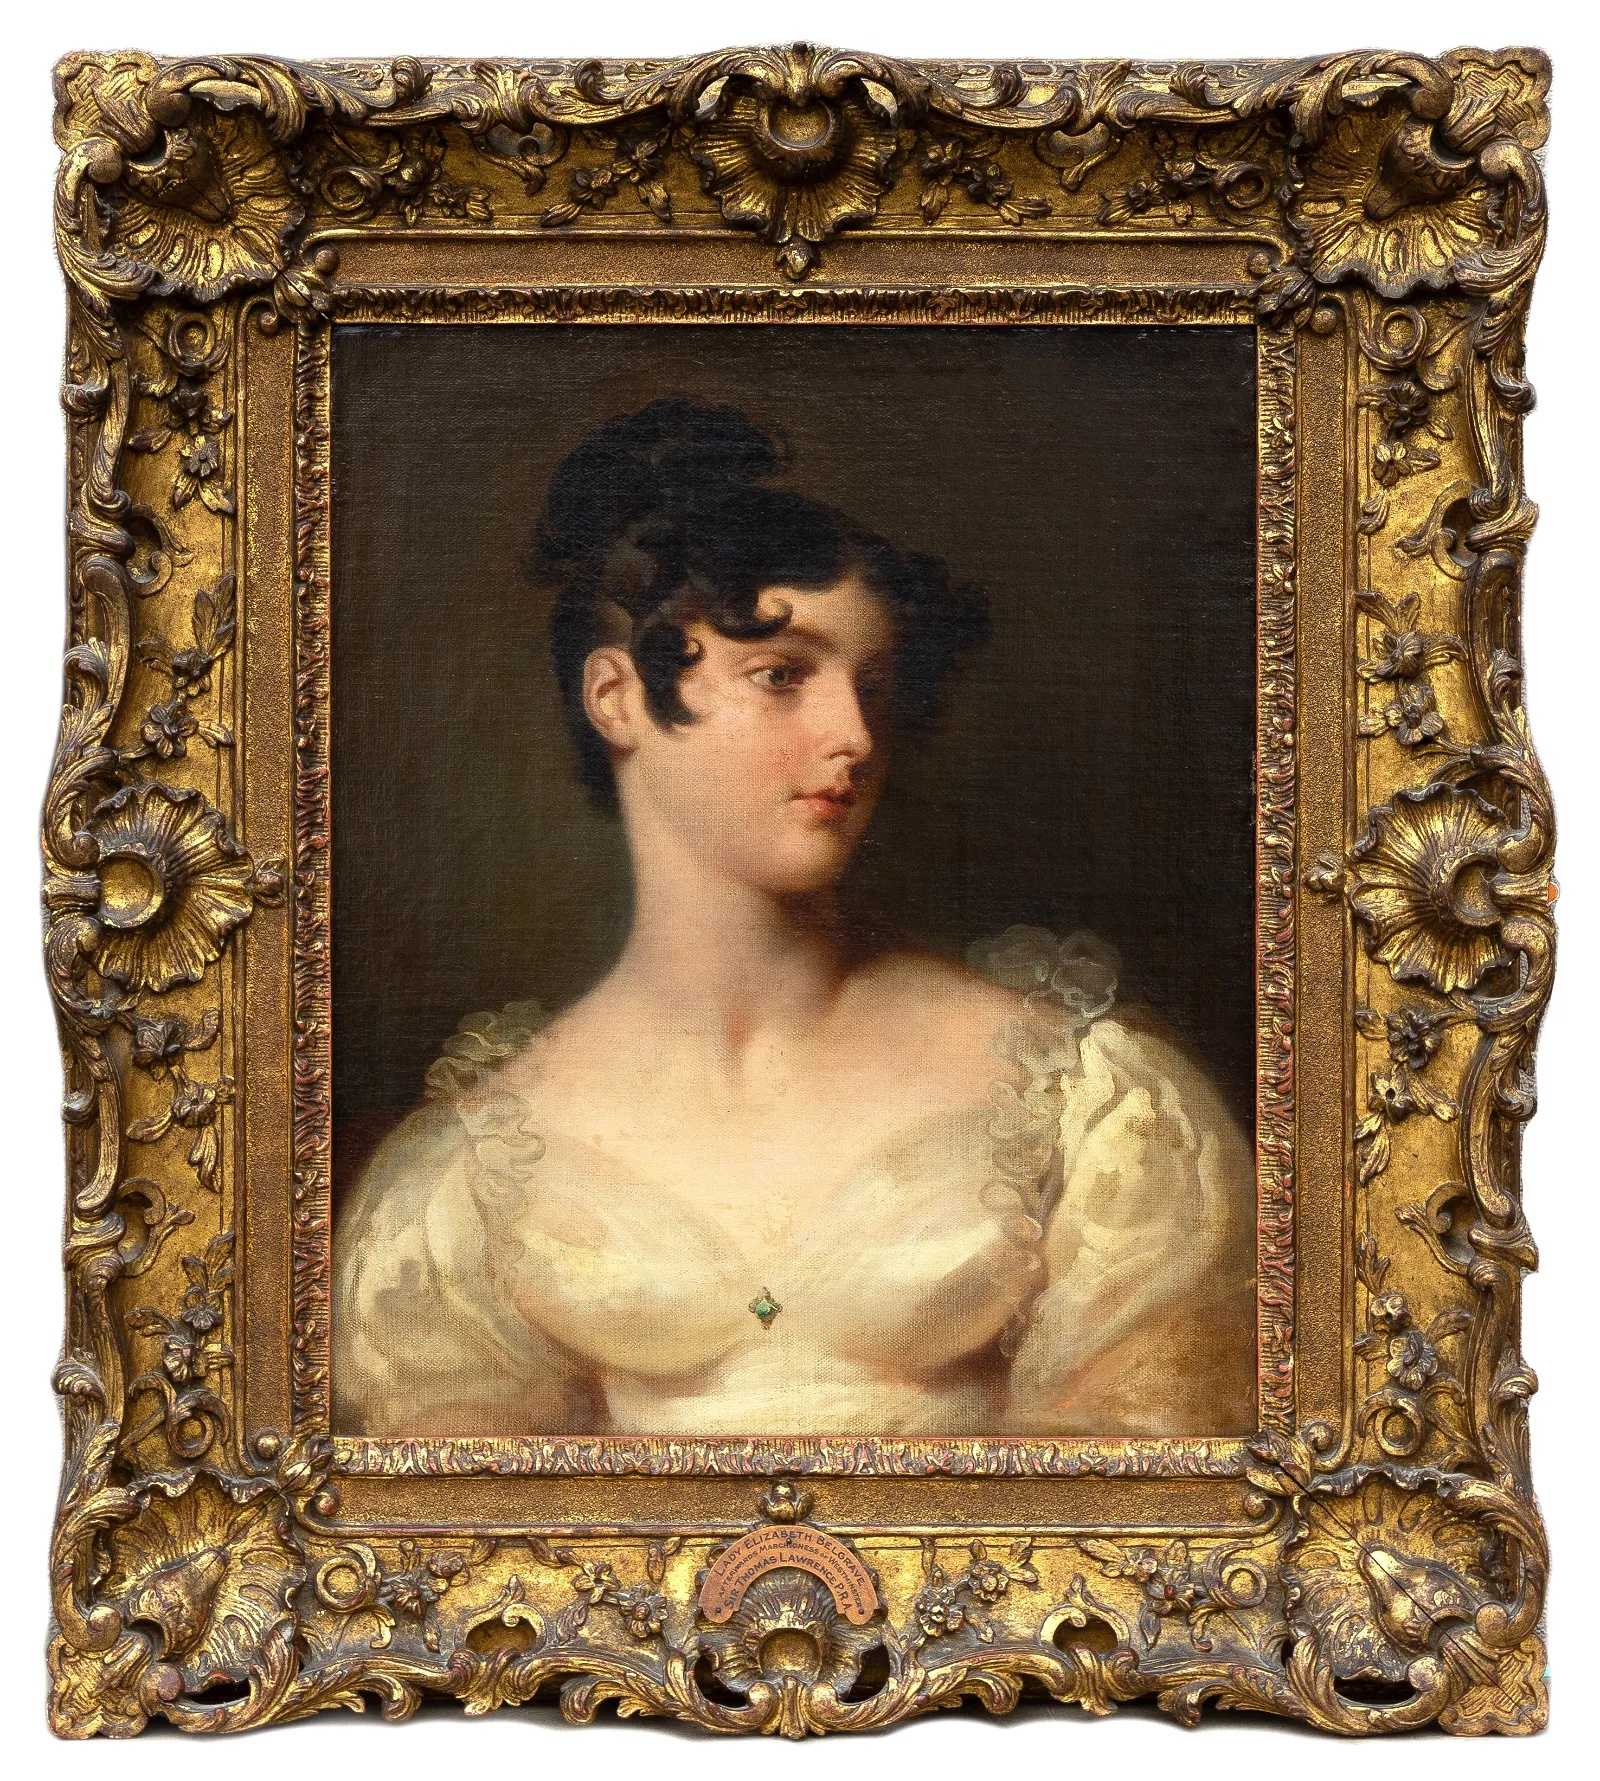 Portrait of Lady Elizabeth Mary, Countess of Belgrave by Sir Thomas Lawrence, which sold for $16,000 ($20,000 with buyer's premium) at Cottone Auctions.